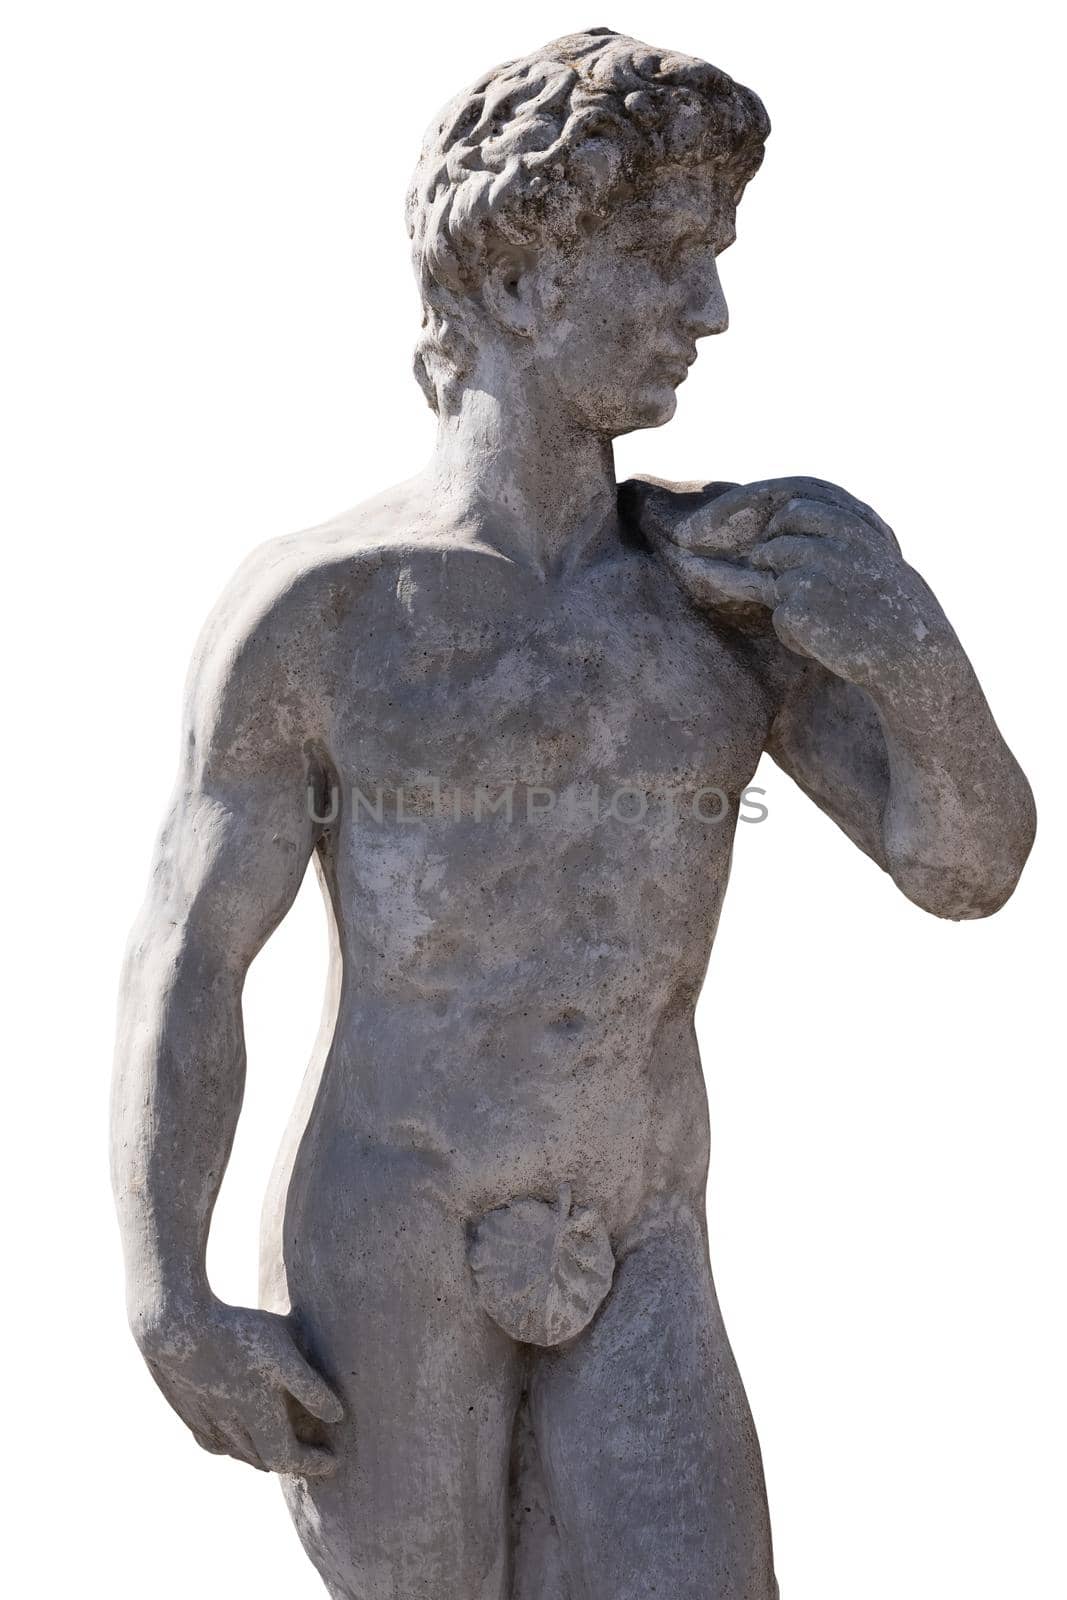 Stone sculpture of naked man on white background by Wavebreakmedia